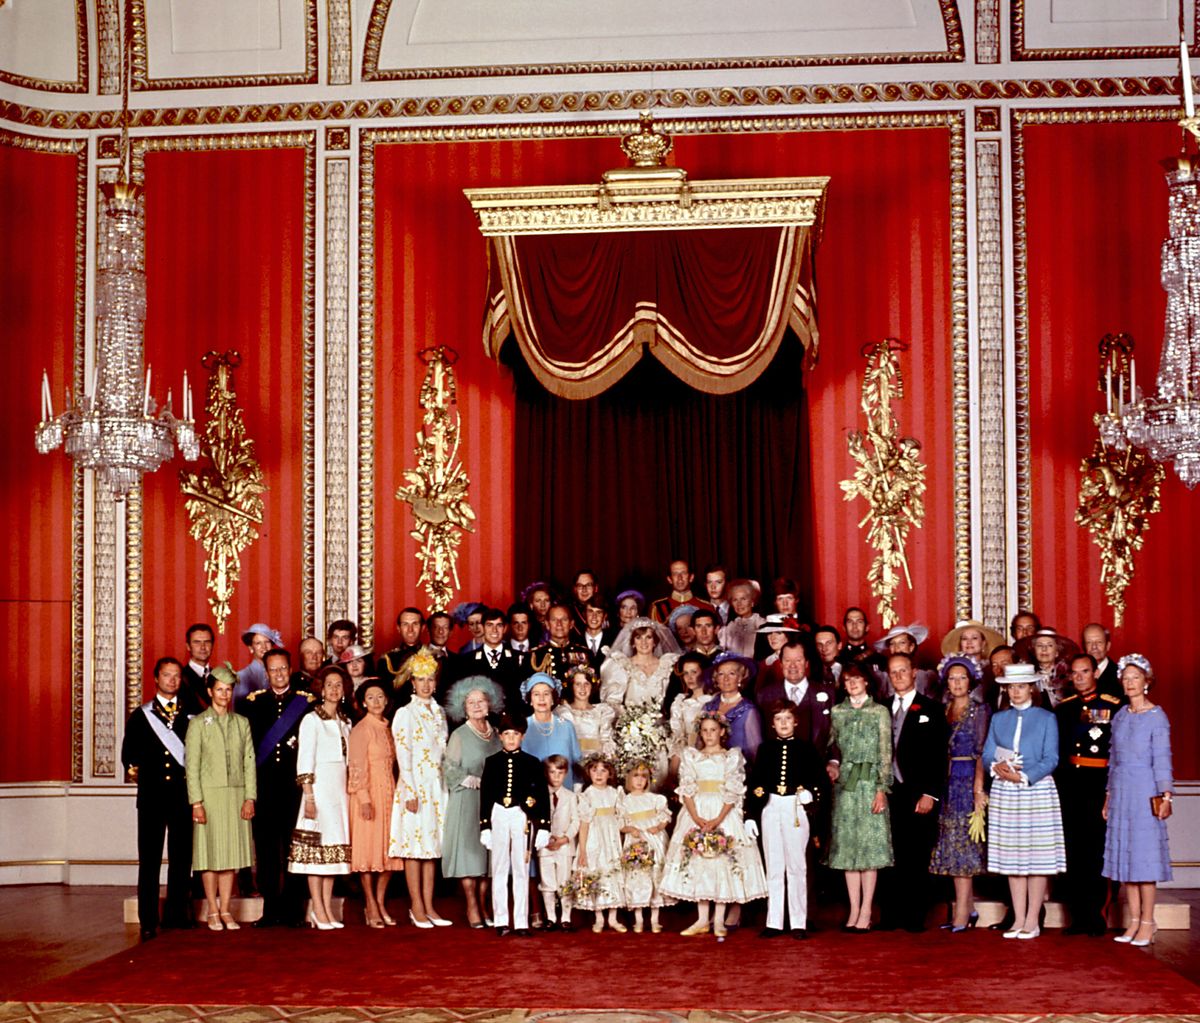 <p>Remember cramming into your high school club photo? This was a lot like that, except instead of a bunch of ultimate frisbee kids, it's a giant group of all of Europe's royal families. Casual.</p>